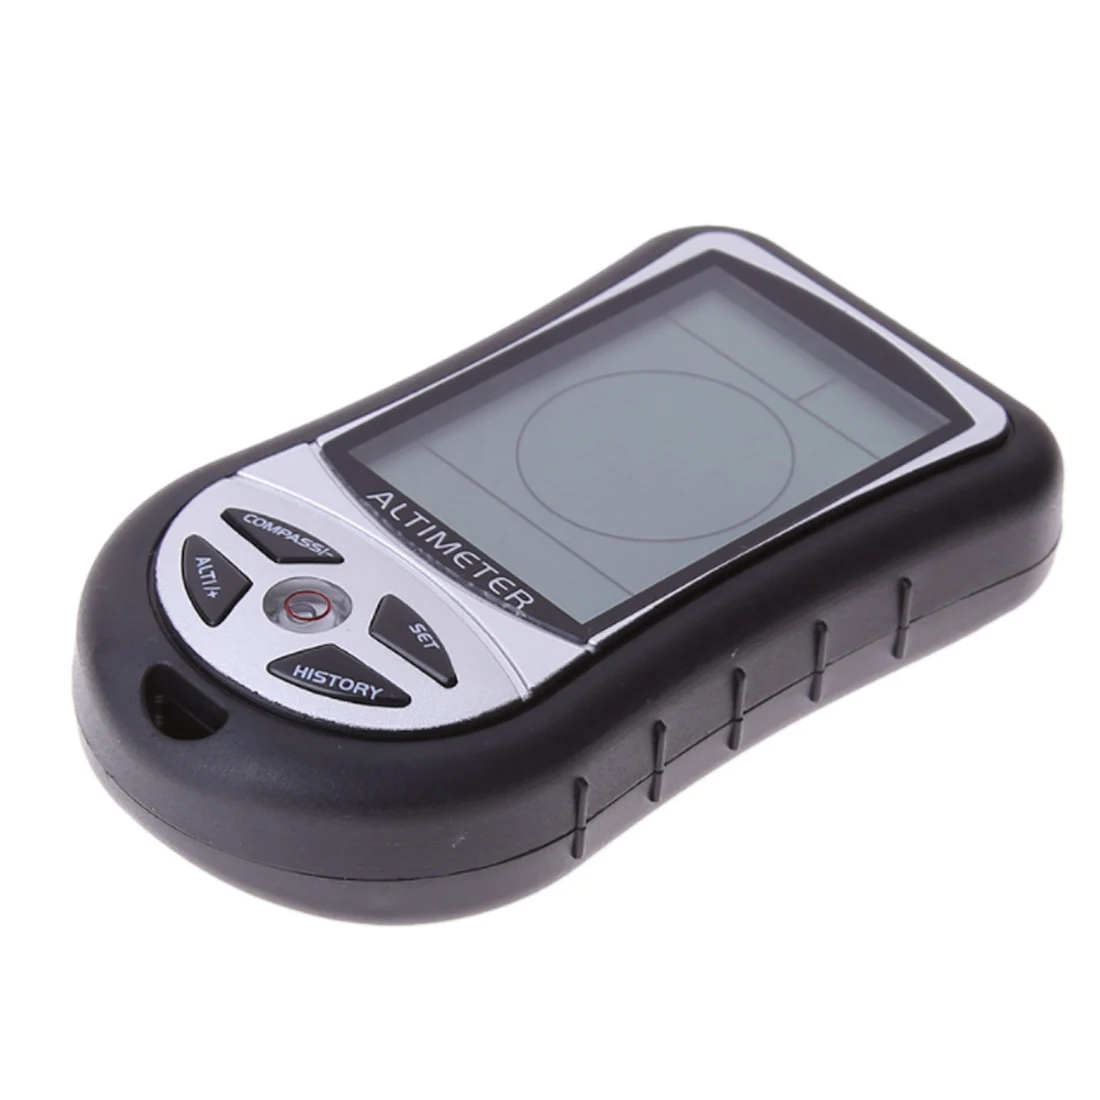 

Digital 8 In 1 Compass Altimeter Barometer Thermometer Weather Forecast Height Gauge altitude meter With LCD Backlight